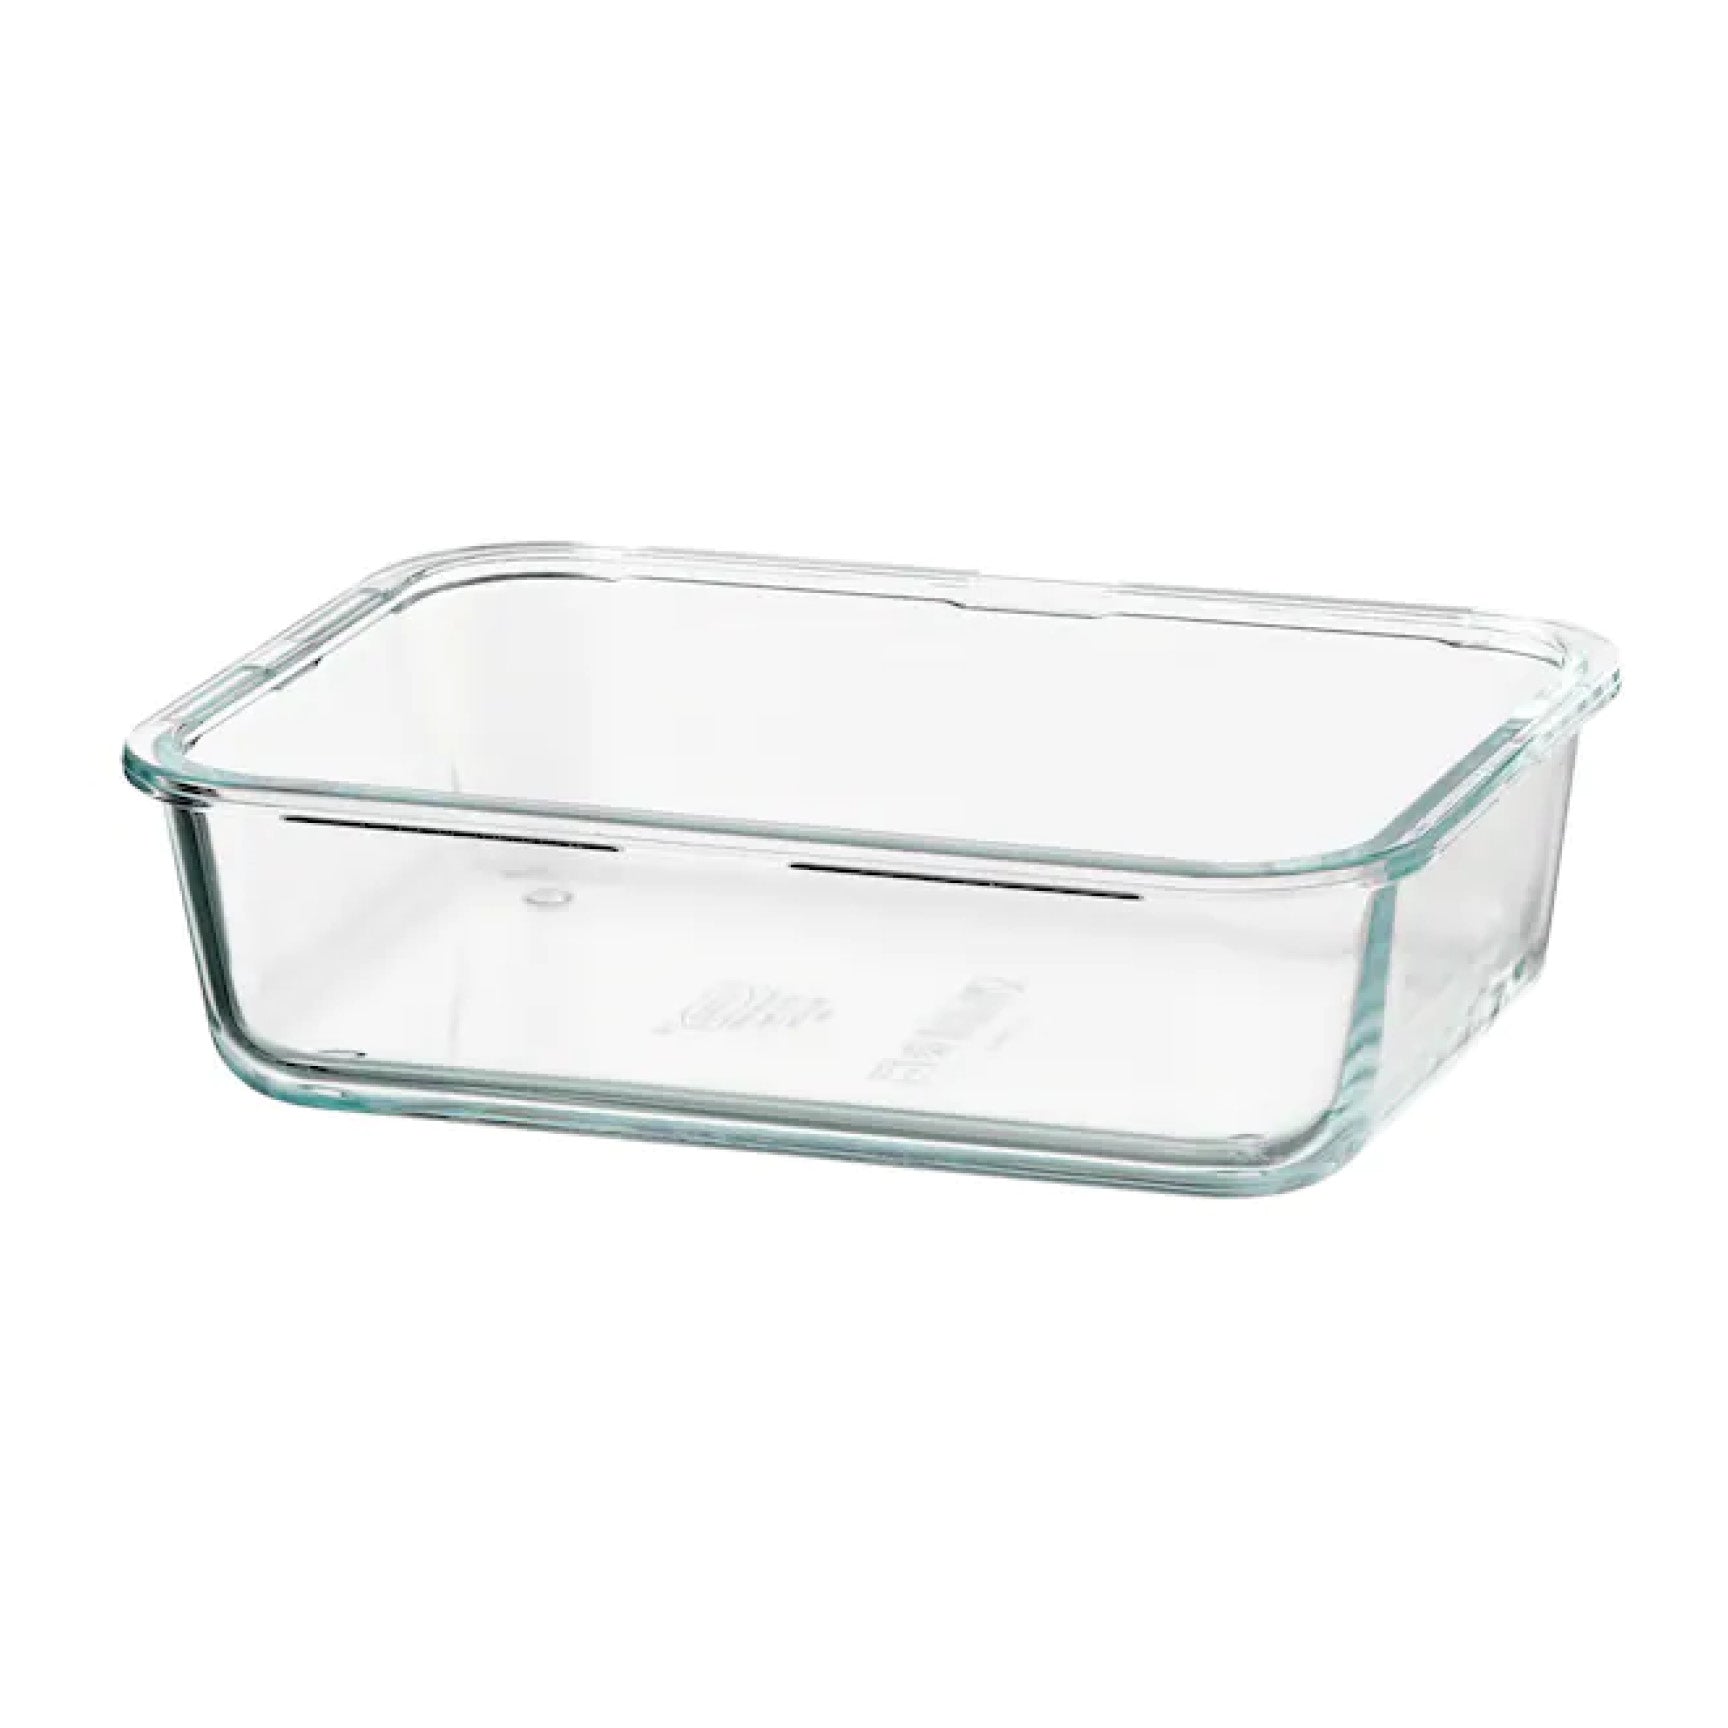 Ikea 365+ Rectangle Glass Food Container, 1L